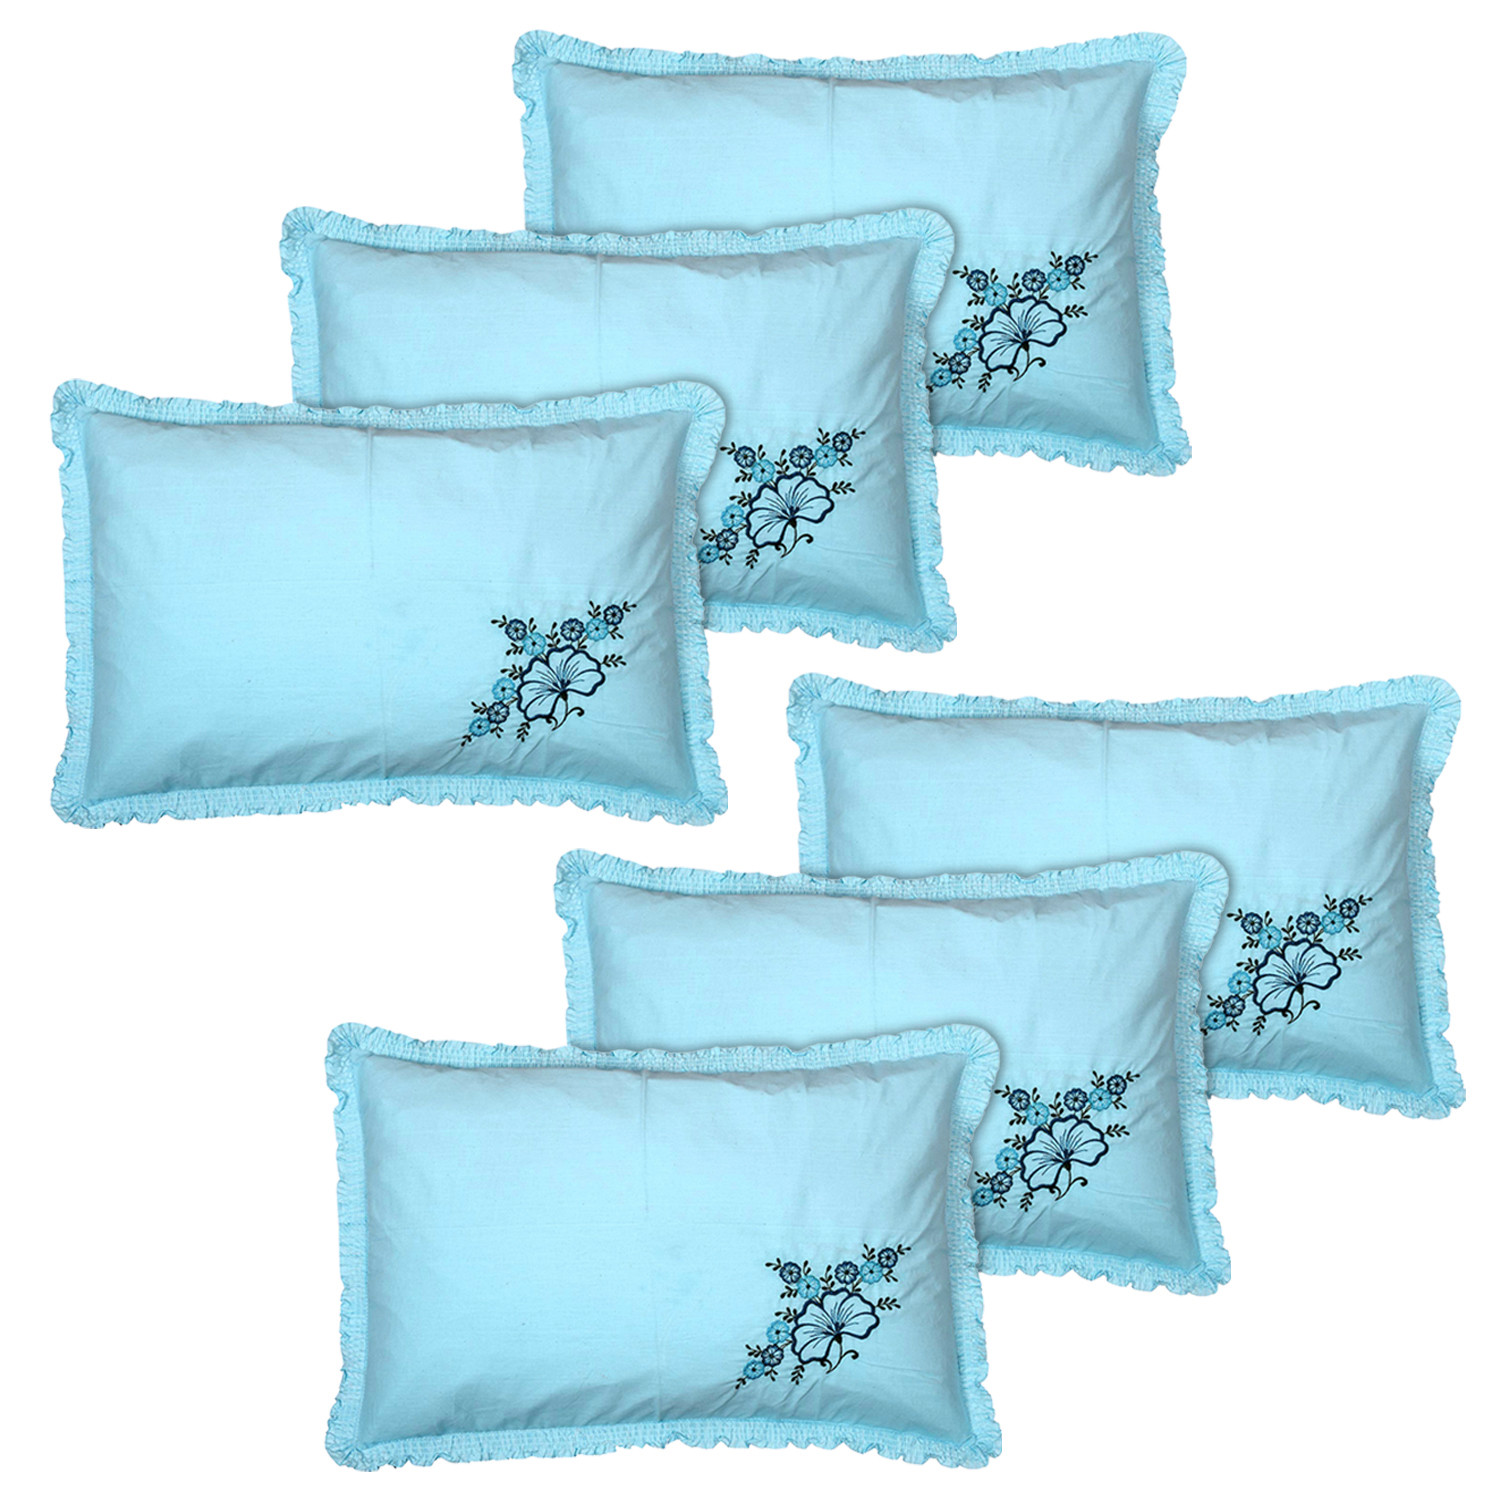 Kuber Industries Embroidery Pattern Breathable & Soft Cotton Pillow Cover For Sofa, Couch, Bed,(Blue) 54KM4110